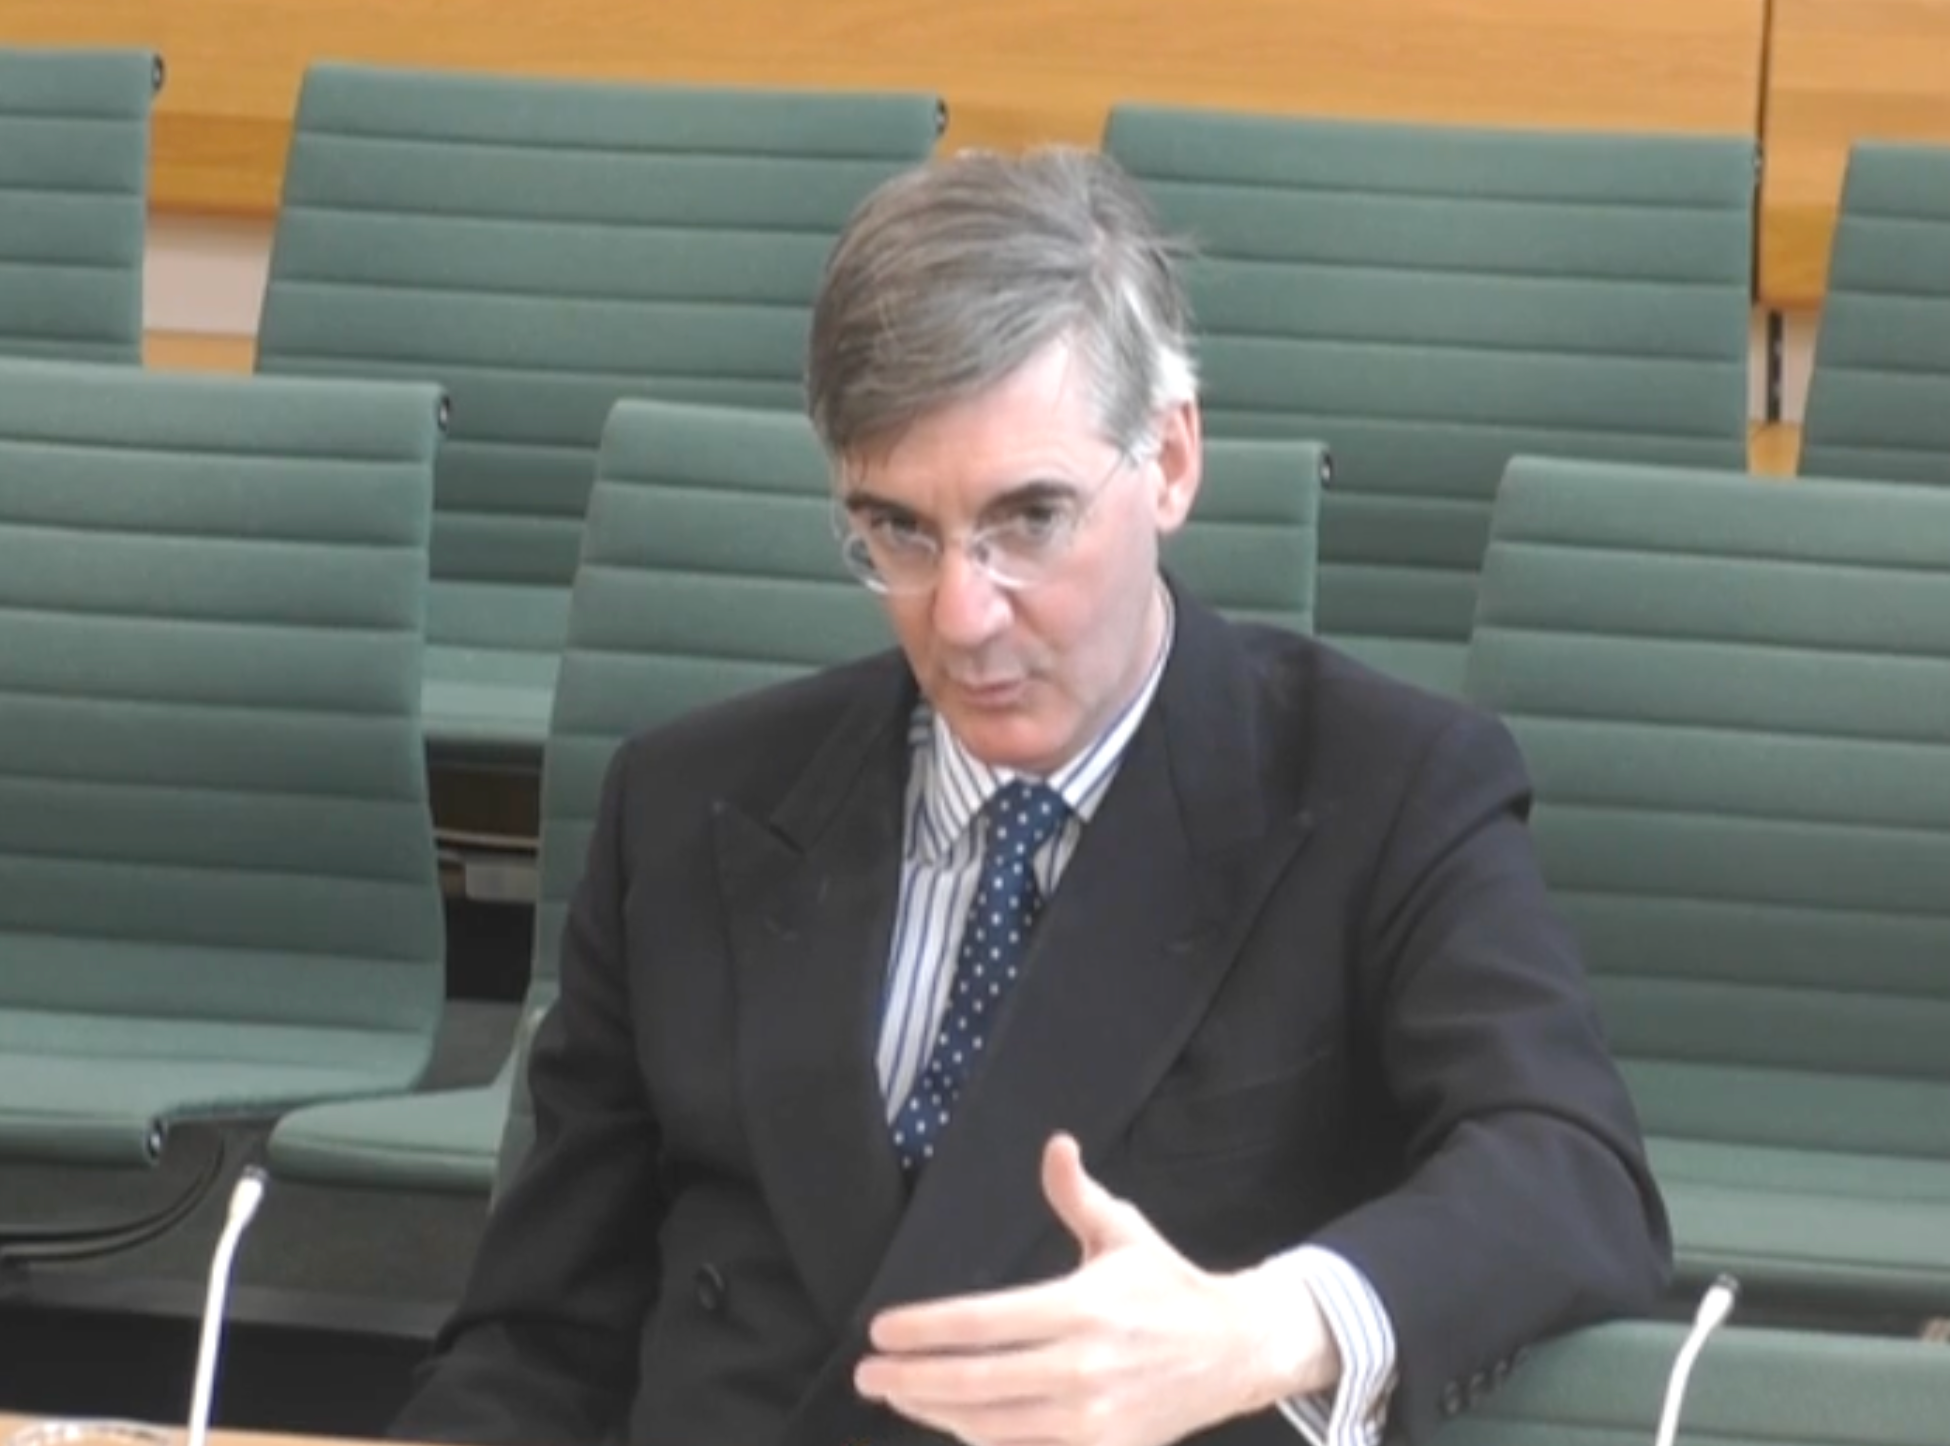 Jacob Rees-Mogg at the public administration select committee on Tuesday